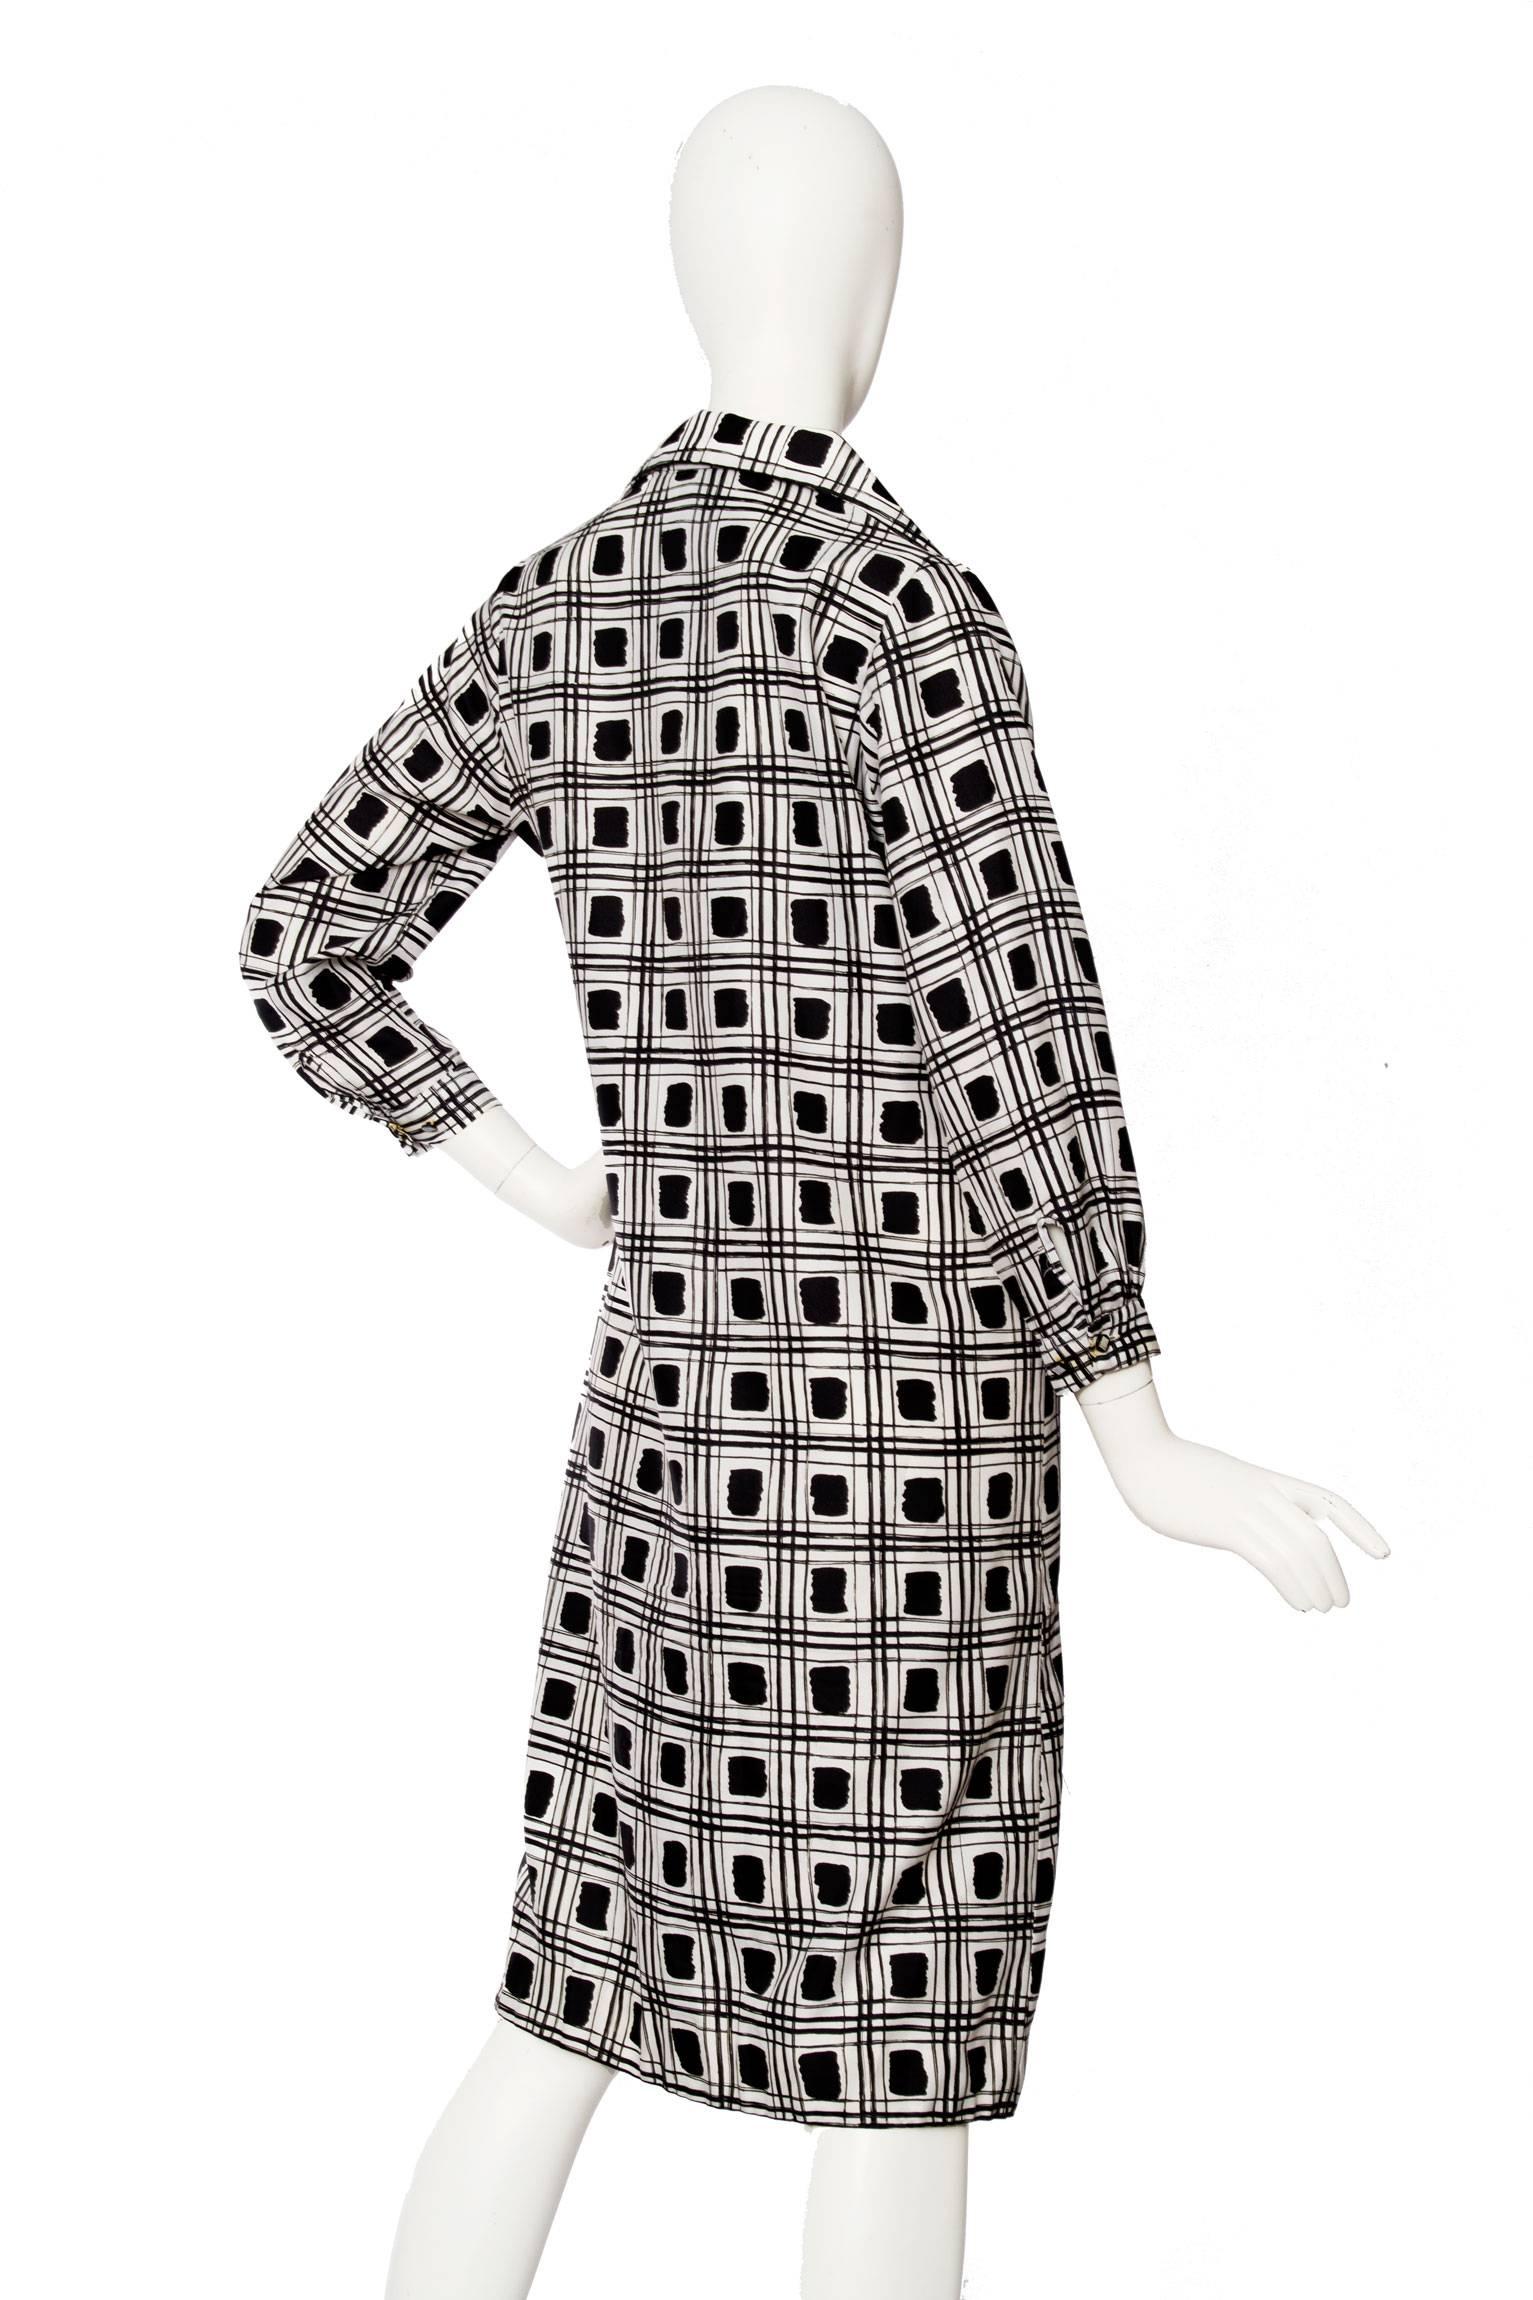 A lovely 1970s Lanvin tunic dress with a black and white graphic print and a characteristic 70s collar with pointed edges. The tunic is held in an overall monochrome colour scheme and is made in polyester. Down the front the tunic has a contrasting